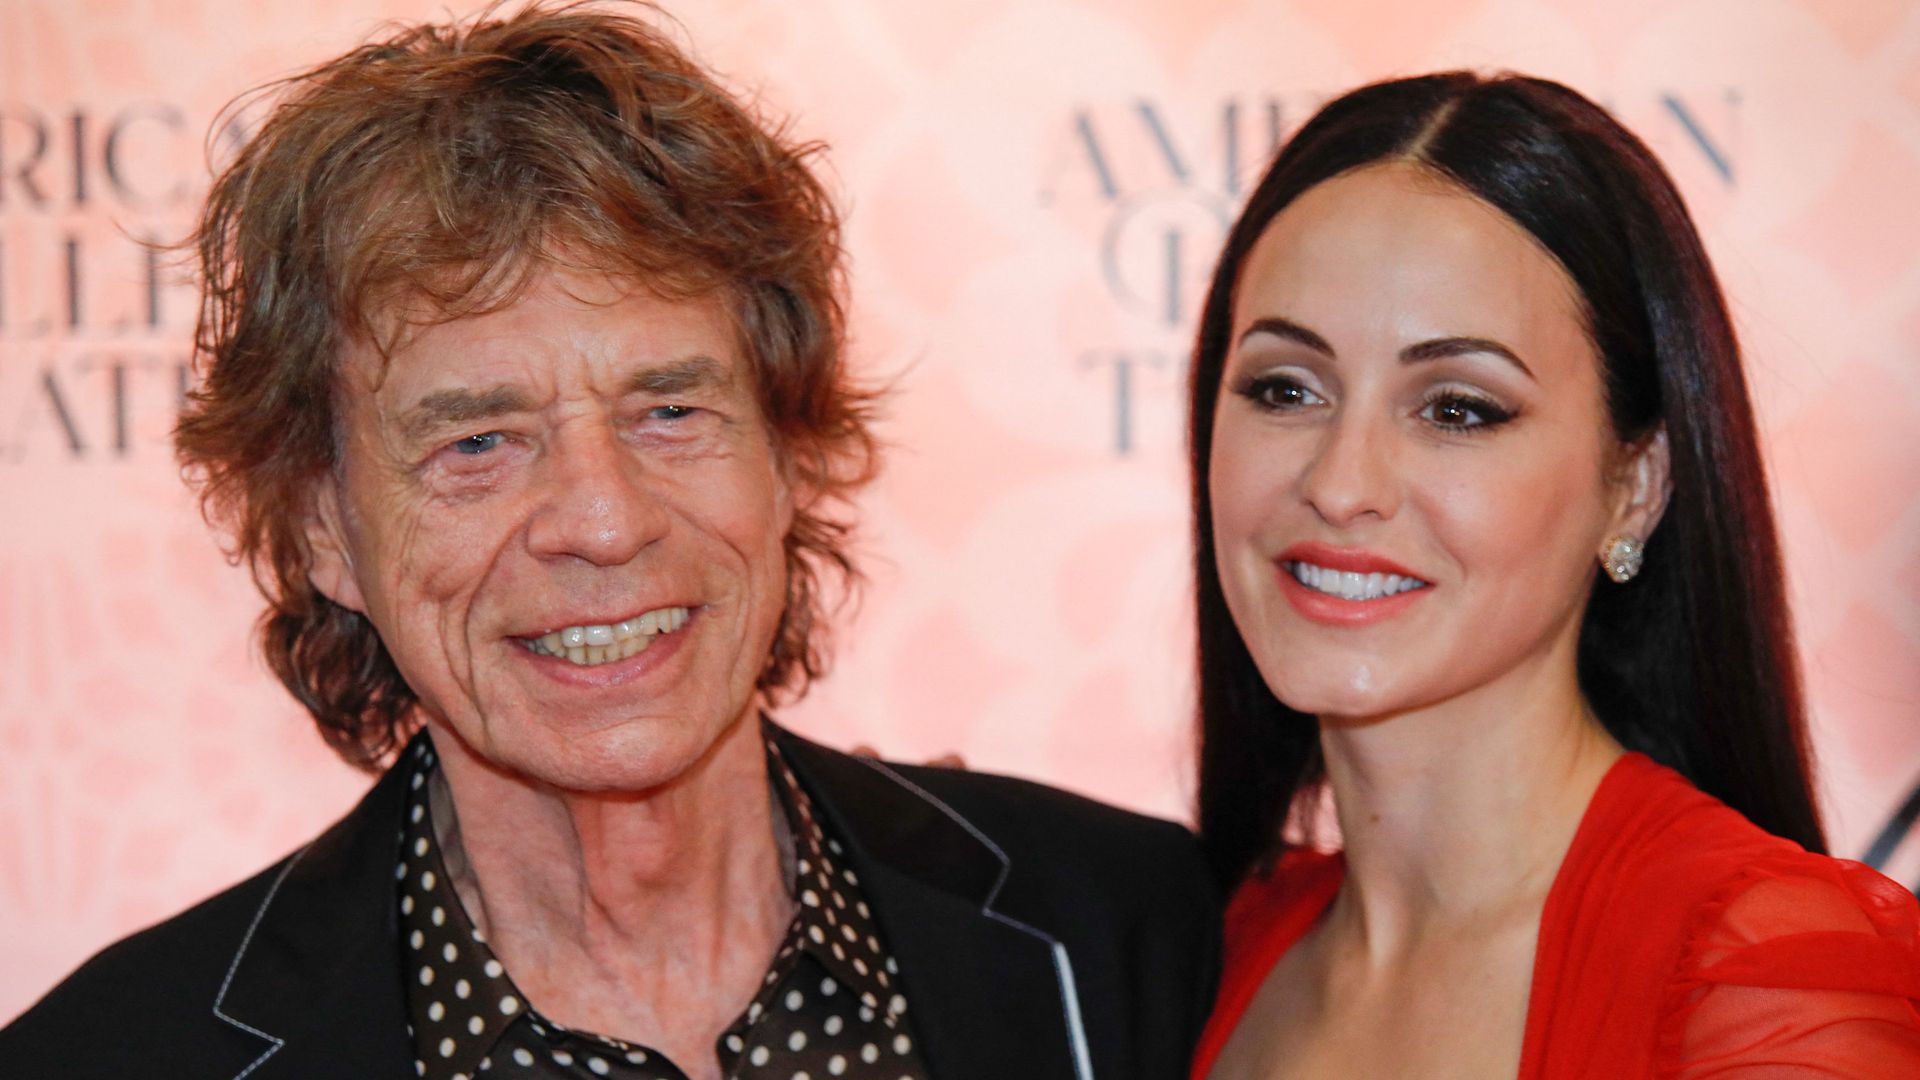 Mick Jagger and Melanie Hamrick smiling on a red carpet